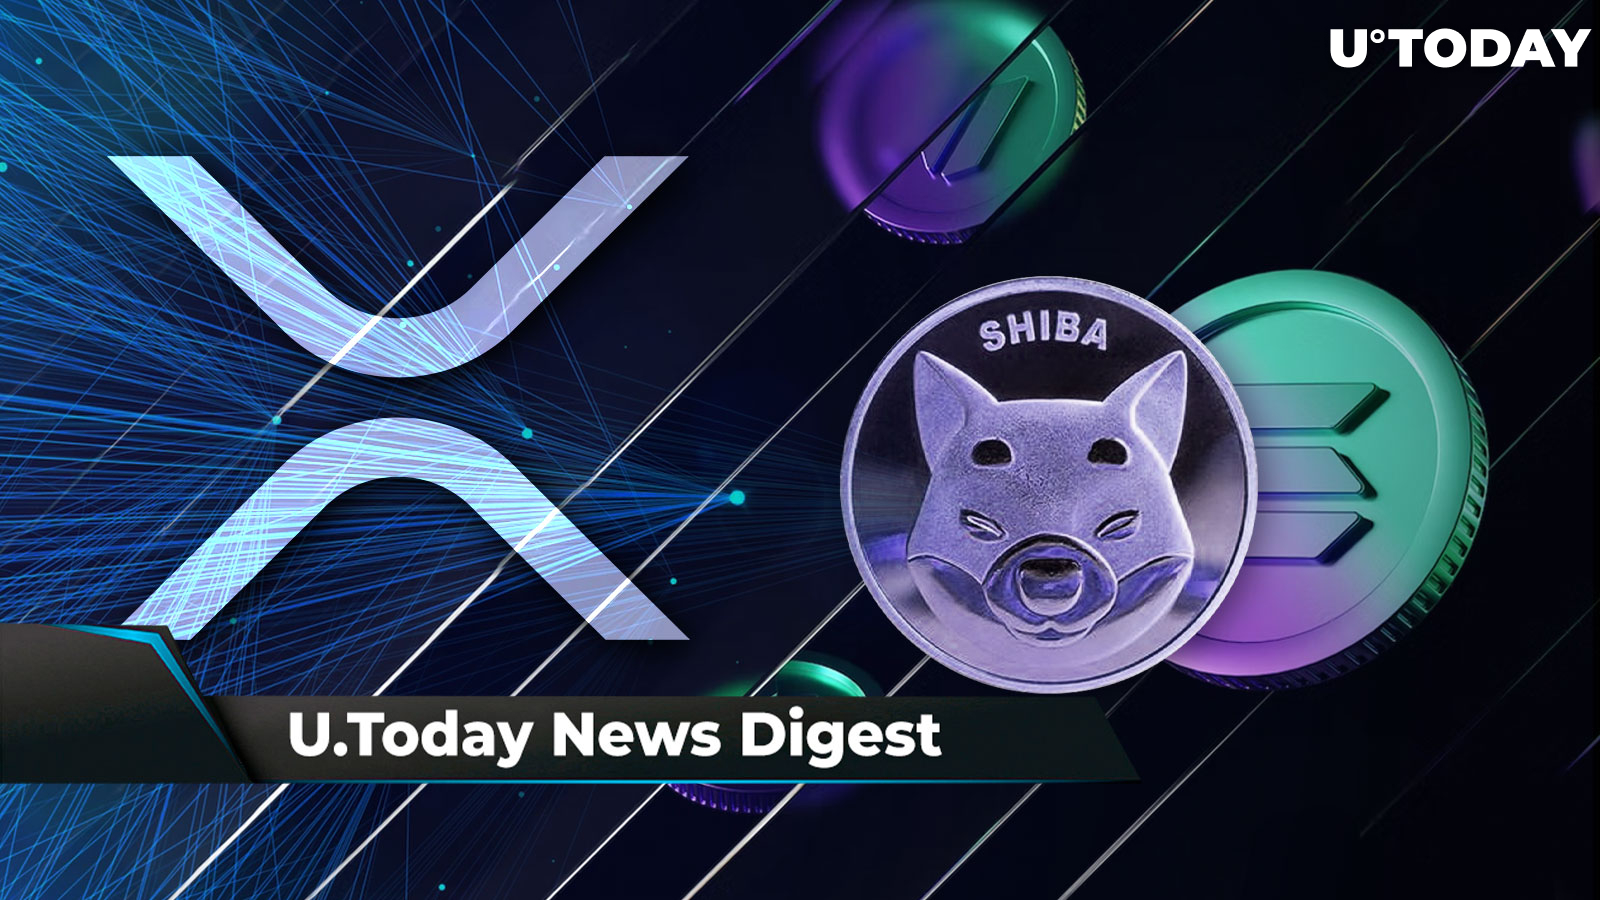 SHIB May Finally Take over SOL, Millions of XRP Moved by Bitstamp, Capital Venture Founder Makes Prediction on Ripple Case Resolution: Crypto News Digest by U.Today